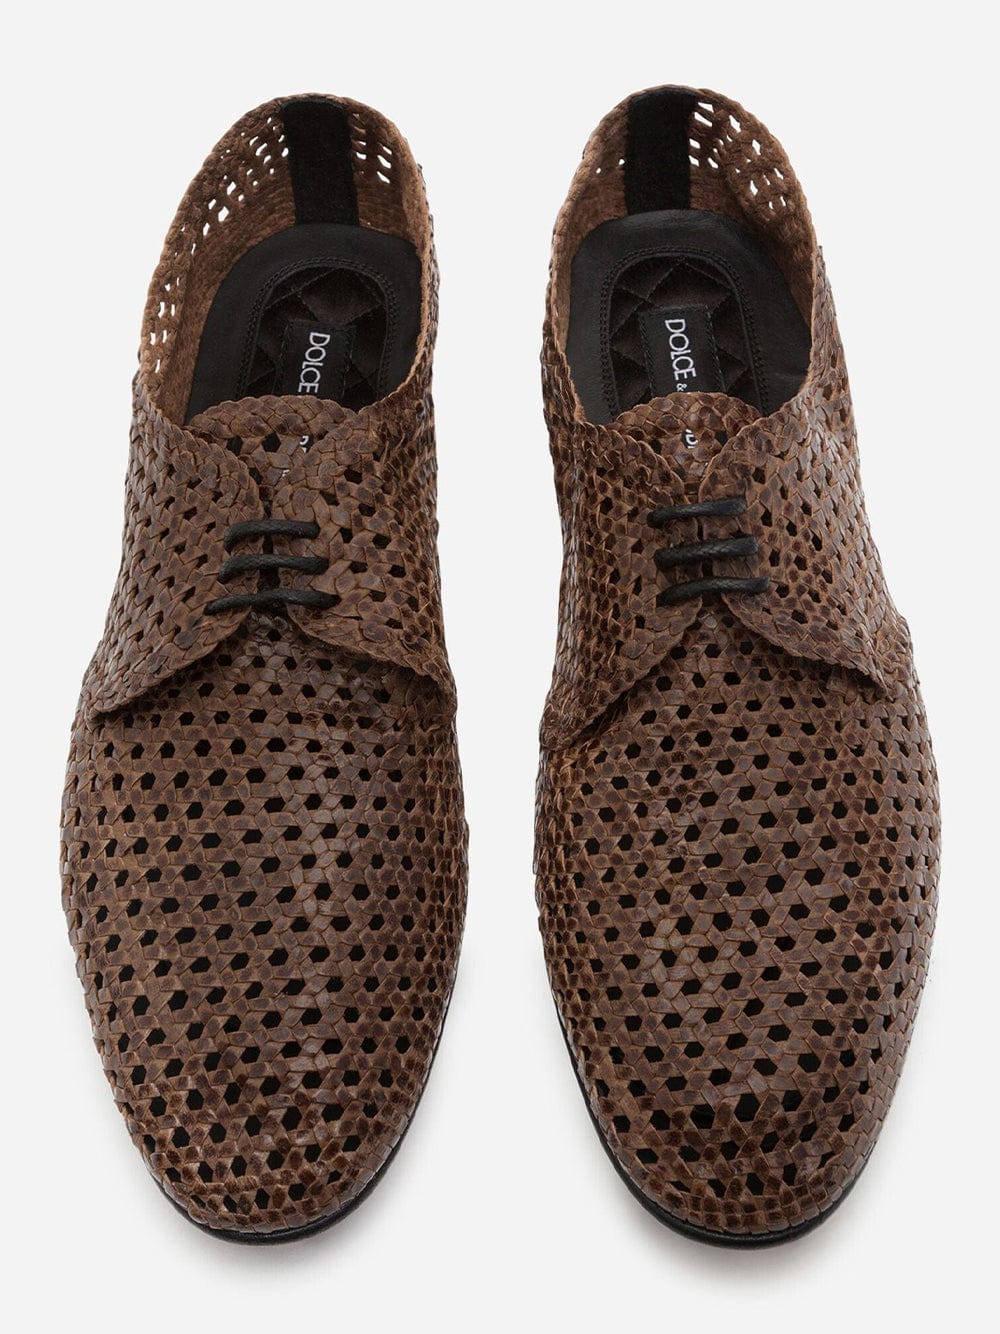 Dolce & Gabbana Hand-Woven Derby Shoes